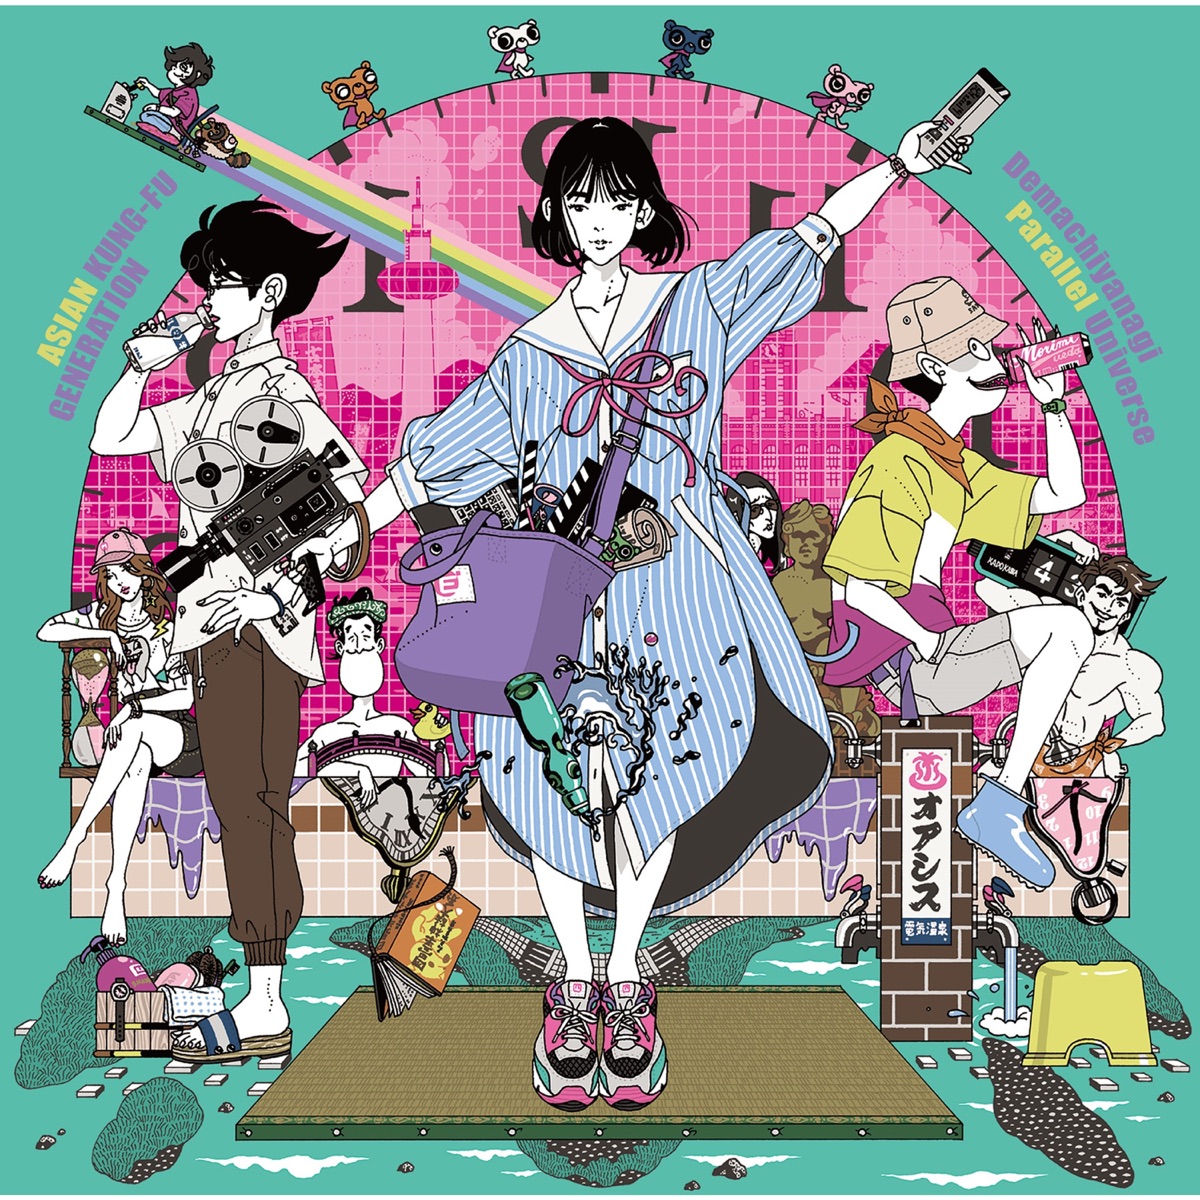 Cover art for『ASIAN KUNG-FU GENERATION - Demachiyanagi Parallel Universe』from the release『Demachiyanagi Parallel Universe』